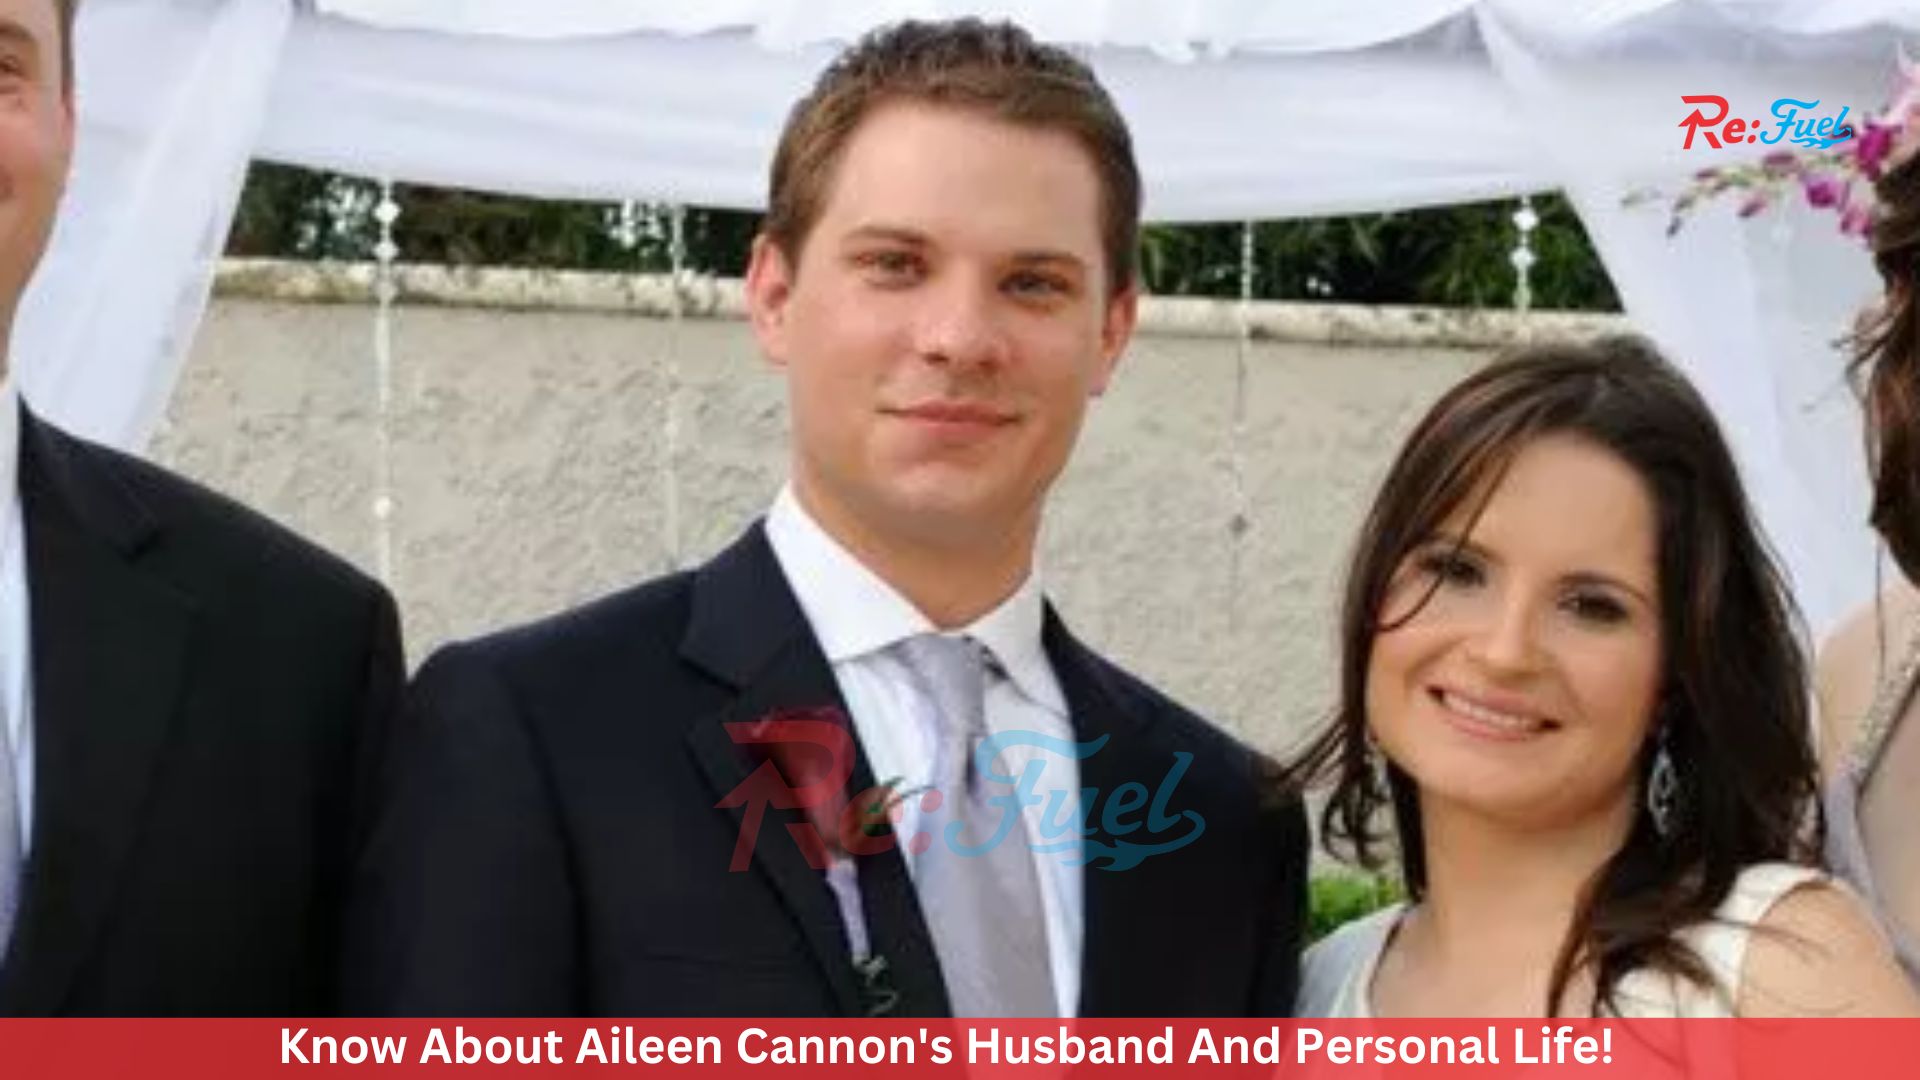 Know About Aileen Cannon's Husband And Personal Life!